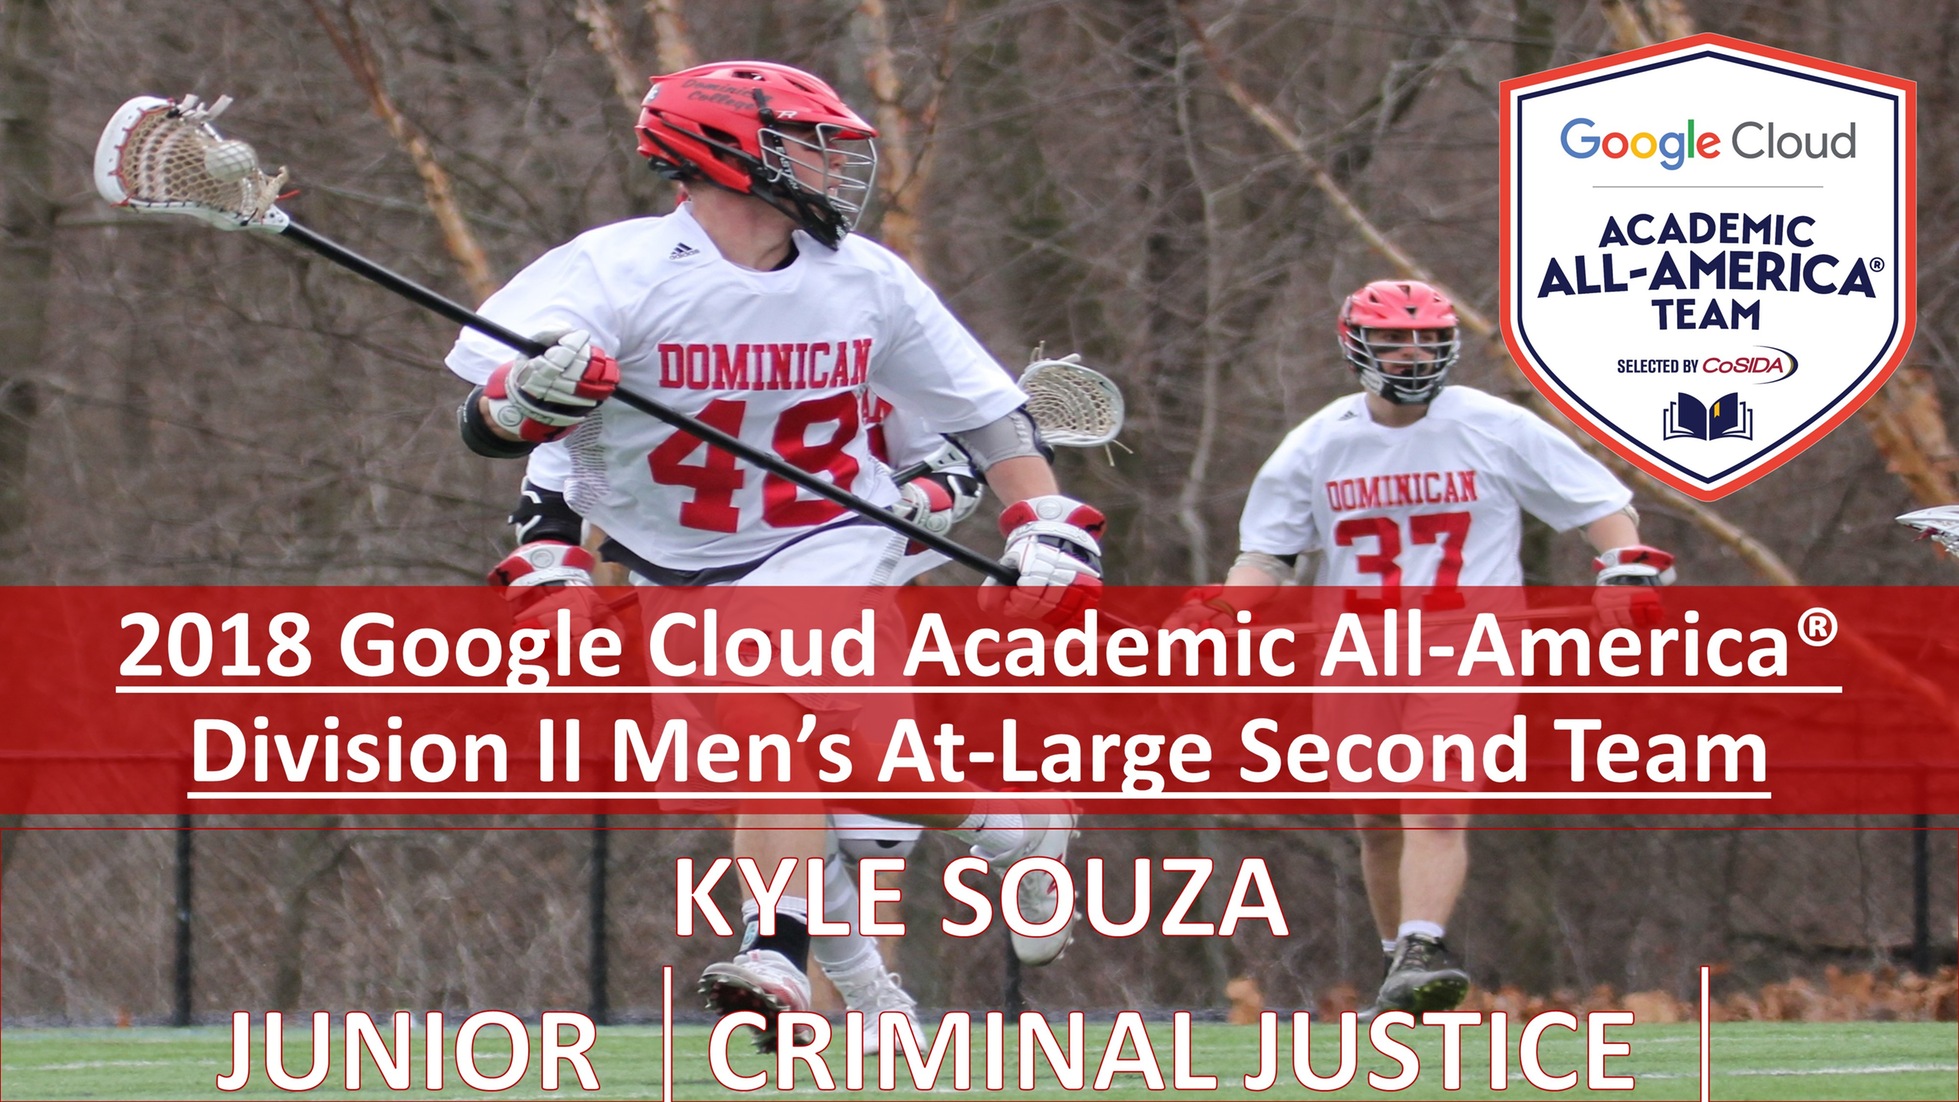 DC men's lacrosse player, Kyle Souza, has been named to the 2018 Google Cloud Academic All-America Division II Men's At-Large Second Team